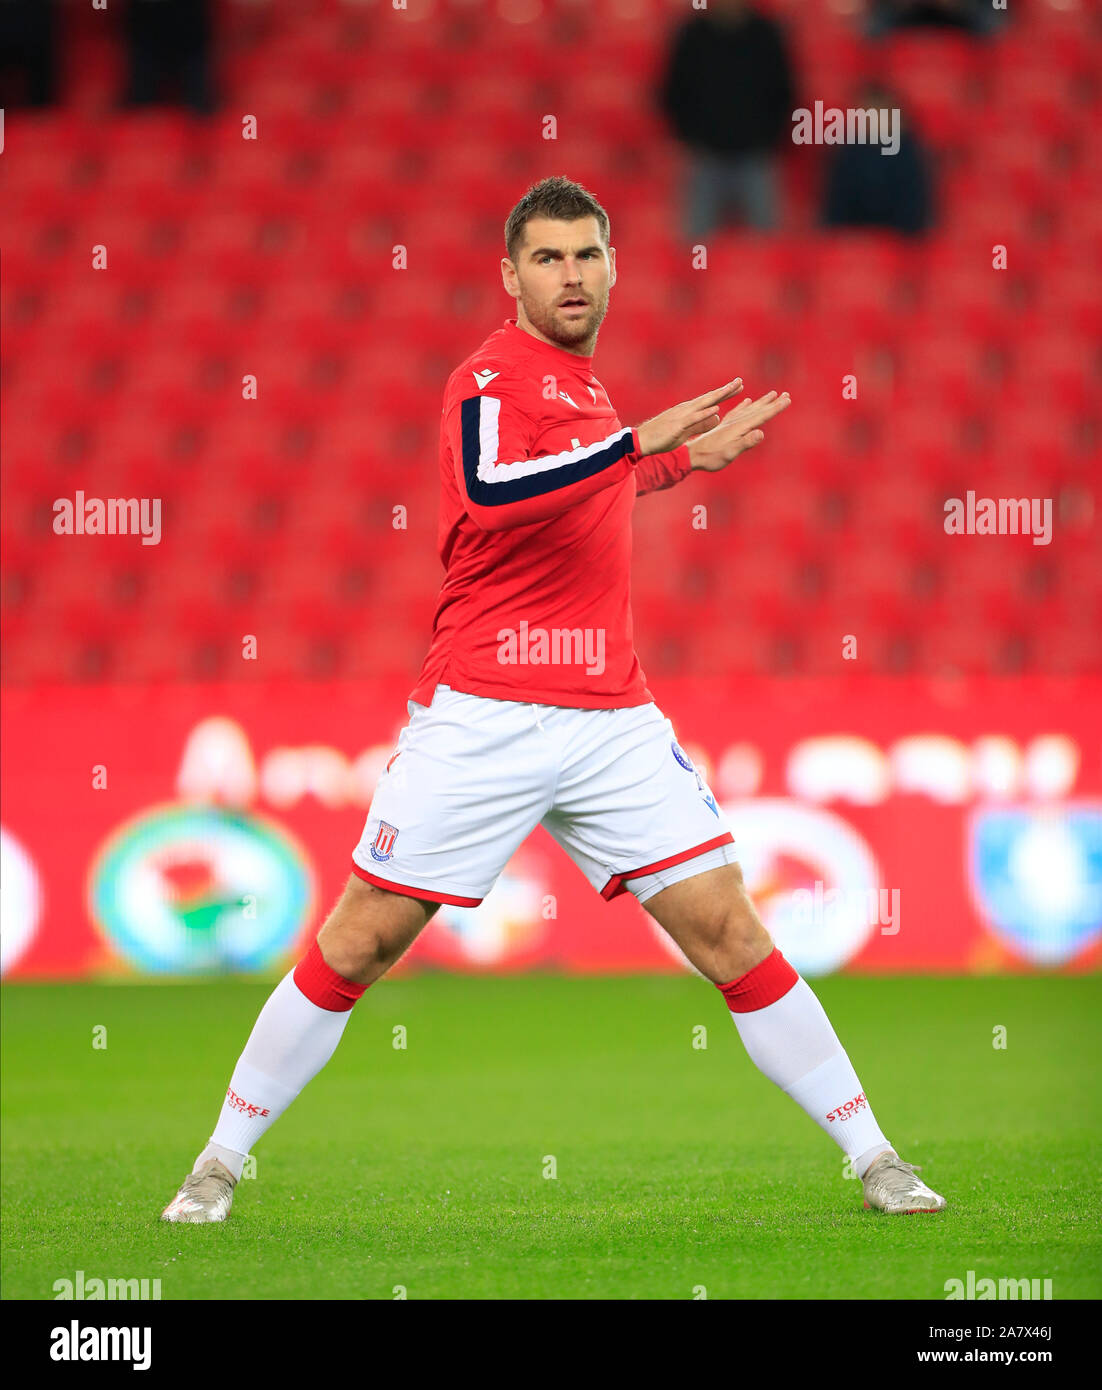 4th November 2019, Bet365 Stadium, Stoke-on-Trent, England; Sky Bet Championship, Stoke City v West Bromwich Albion : Sam Vokes (9) of Stoke City  warms up for the match Credit: Conor Molloy/News Images Stock Photo